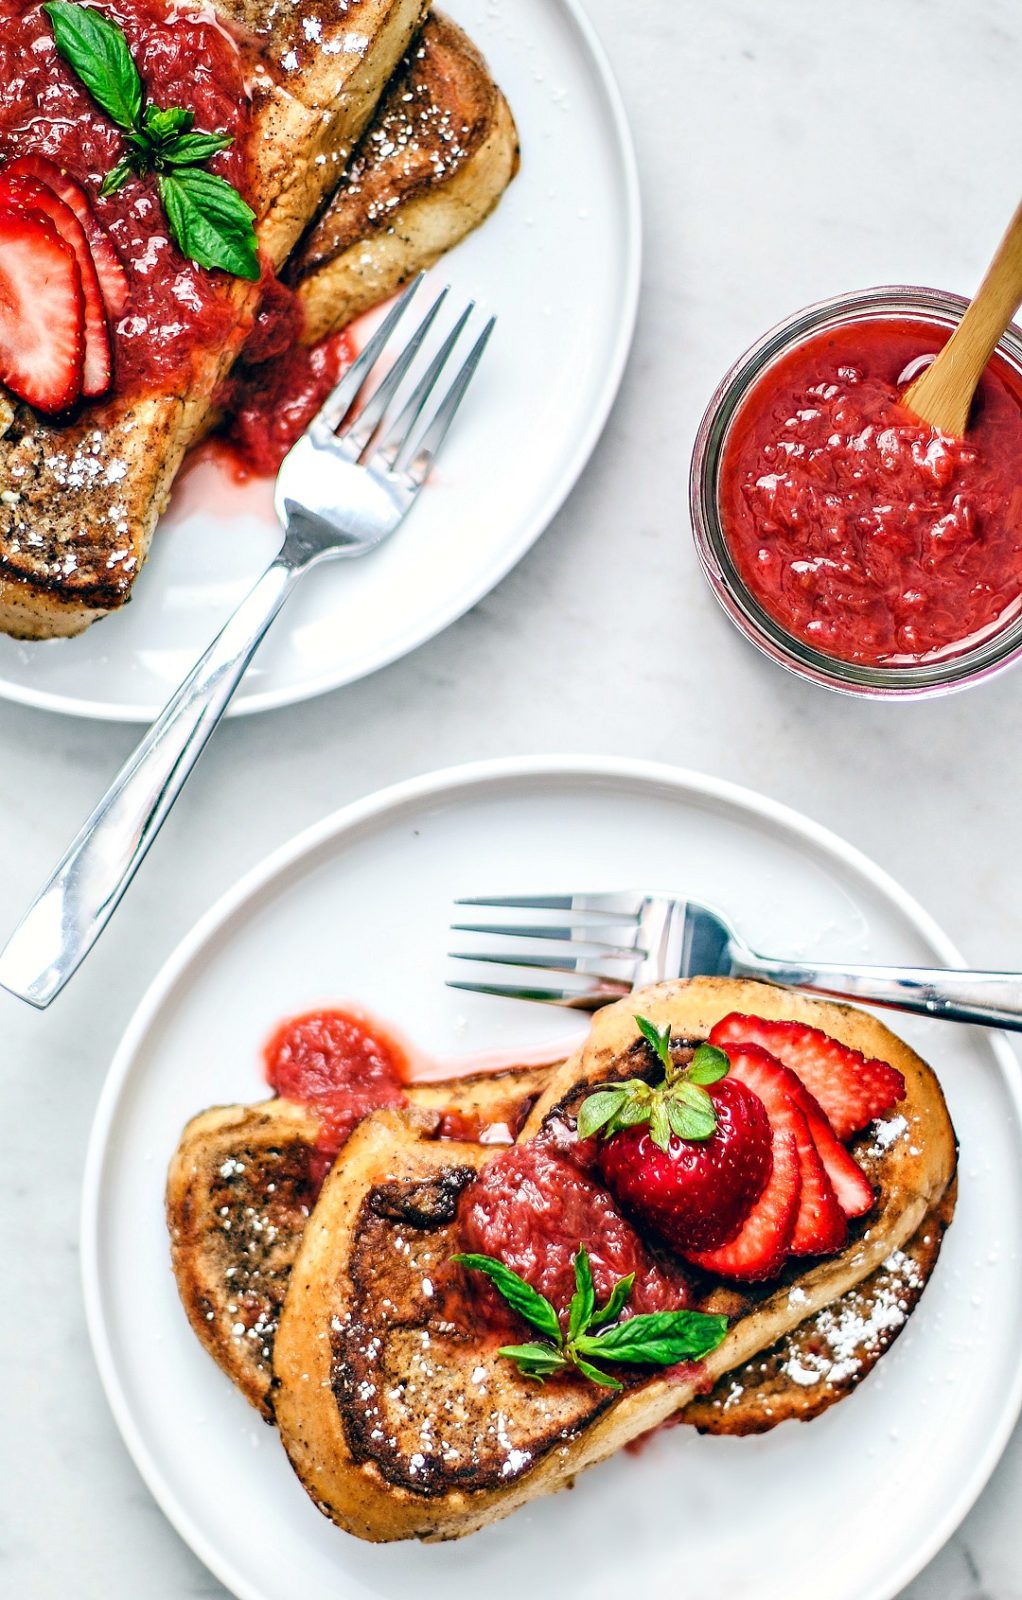 Plated French toast smothered with compote and fresh strawberries.